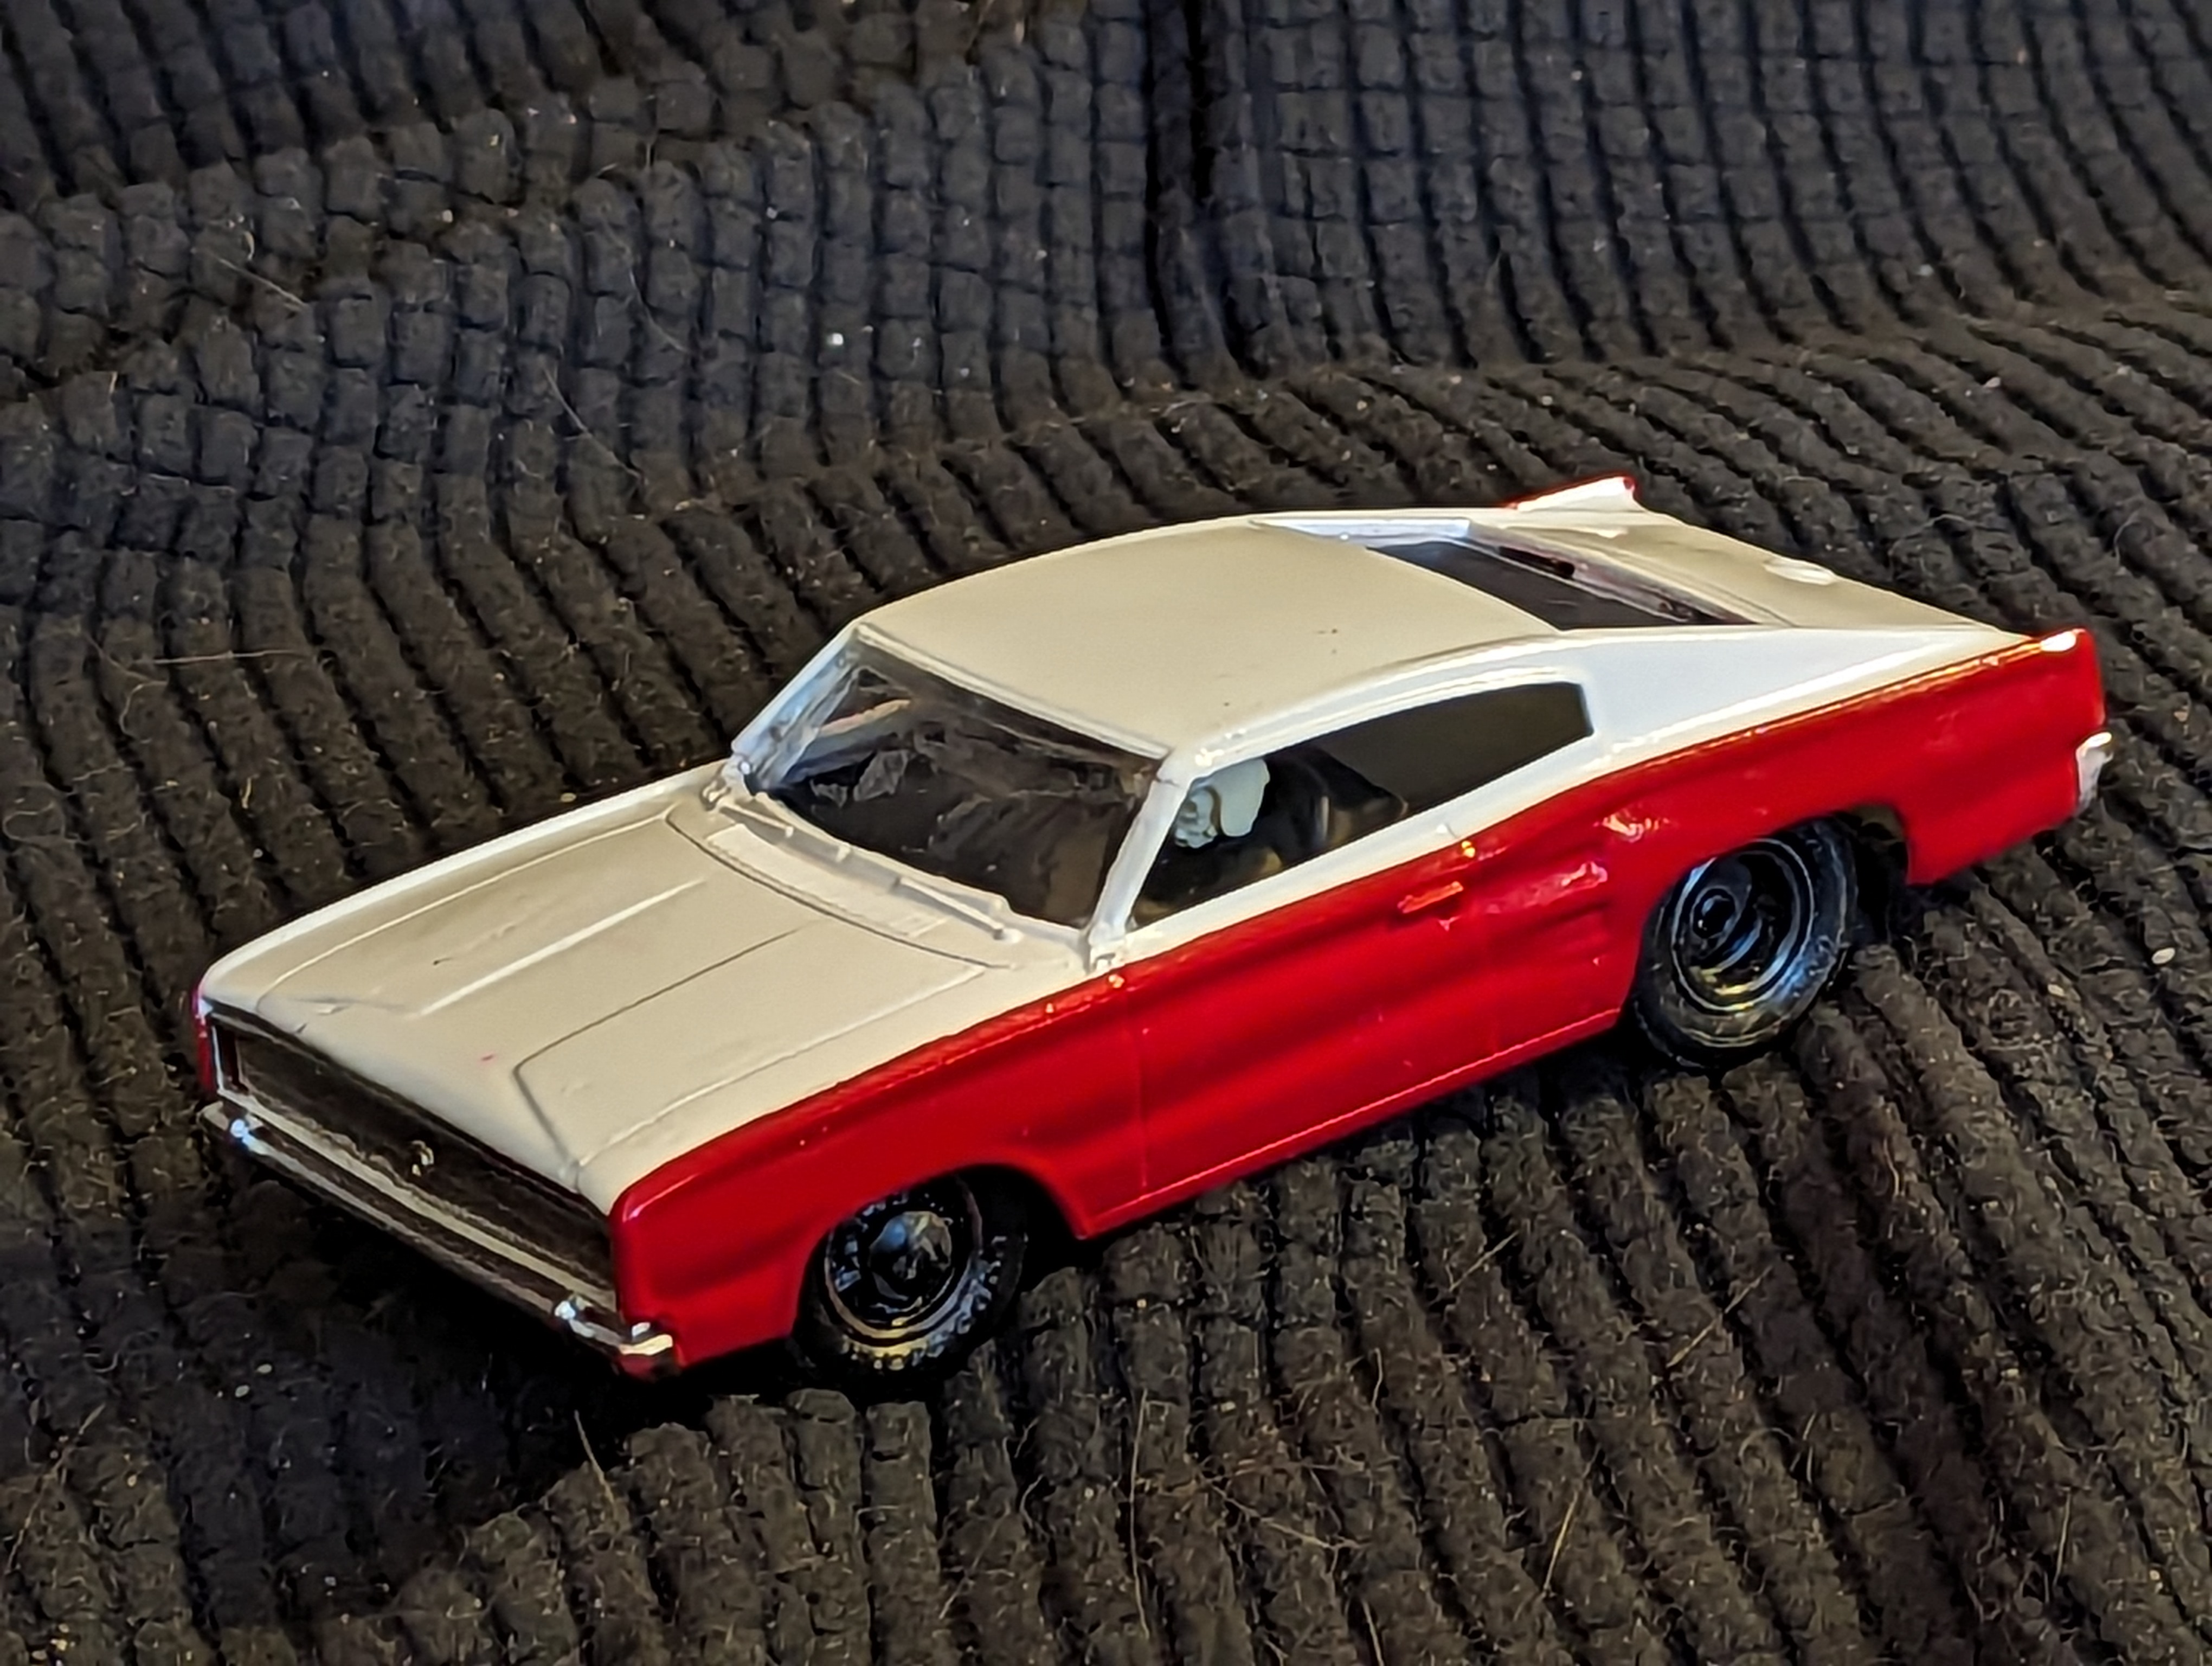 1966 Doddge Charger - racer